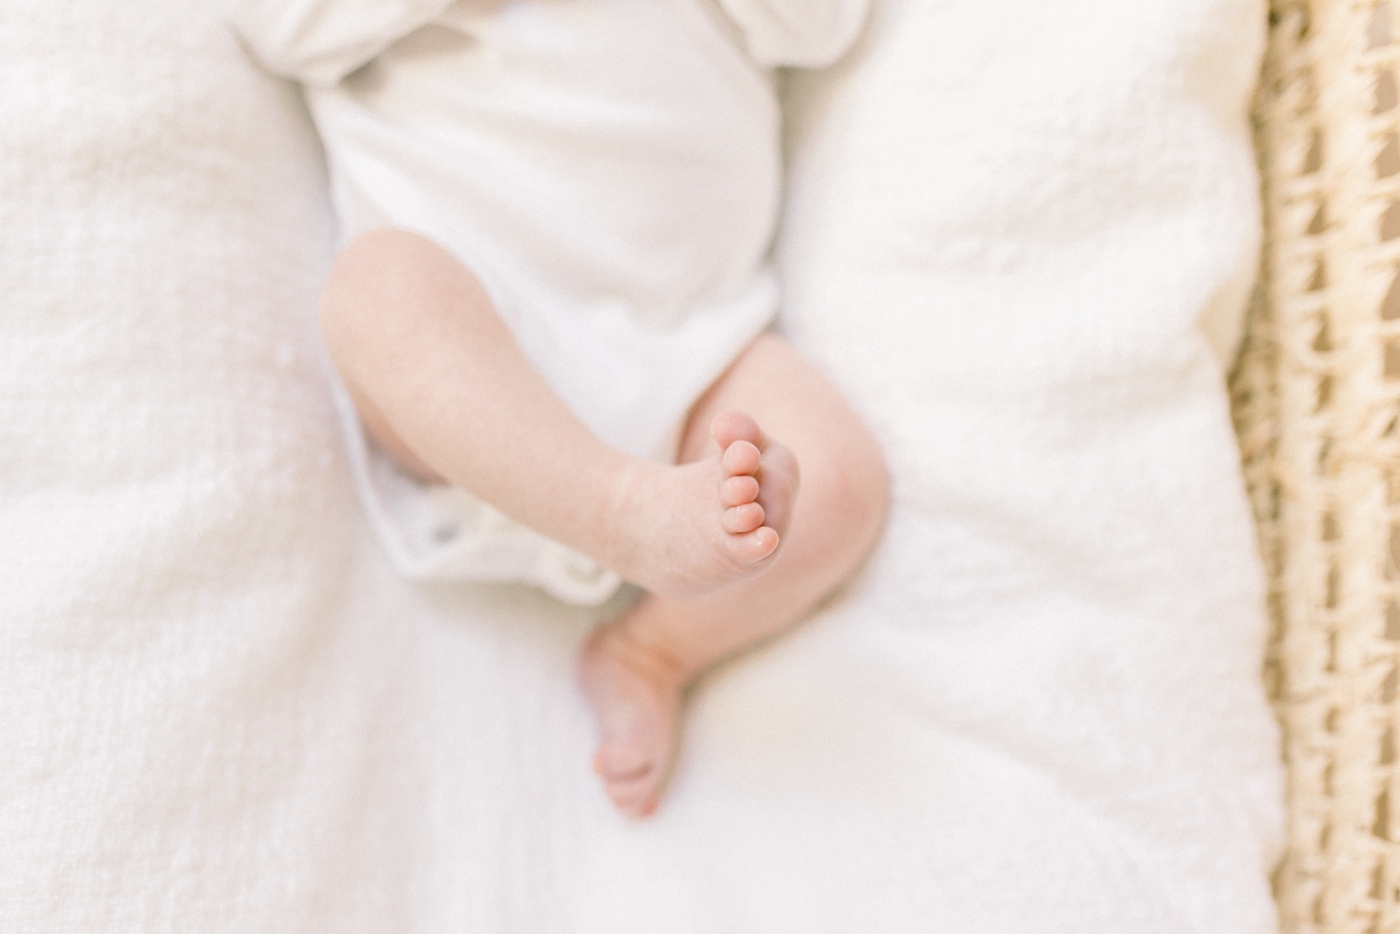 Detail of baby's foot during newborn session | Photo by Caitlyn Motycka Photography.